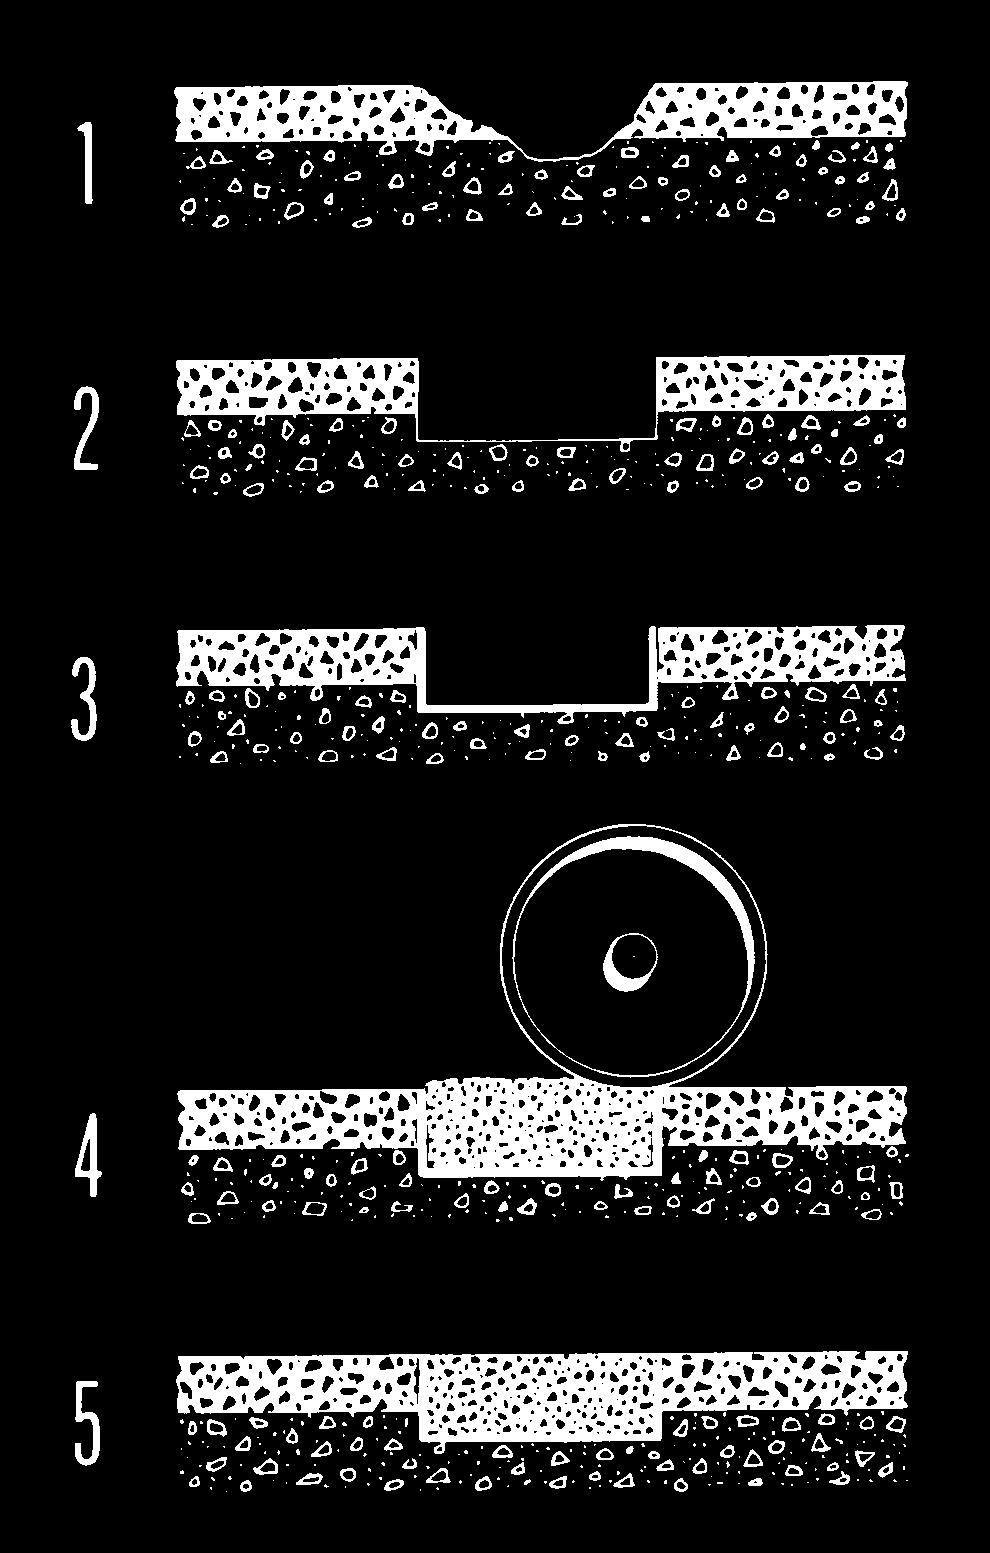 The following illustration outlines the correct procedure for constructing a full-depth patch: 1. Untreated pothole. 2. Surface and base removed to firm support. 3. Tack coat applied. 4.